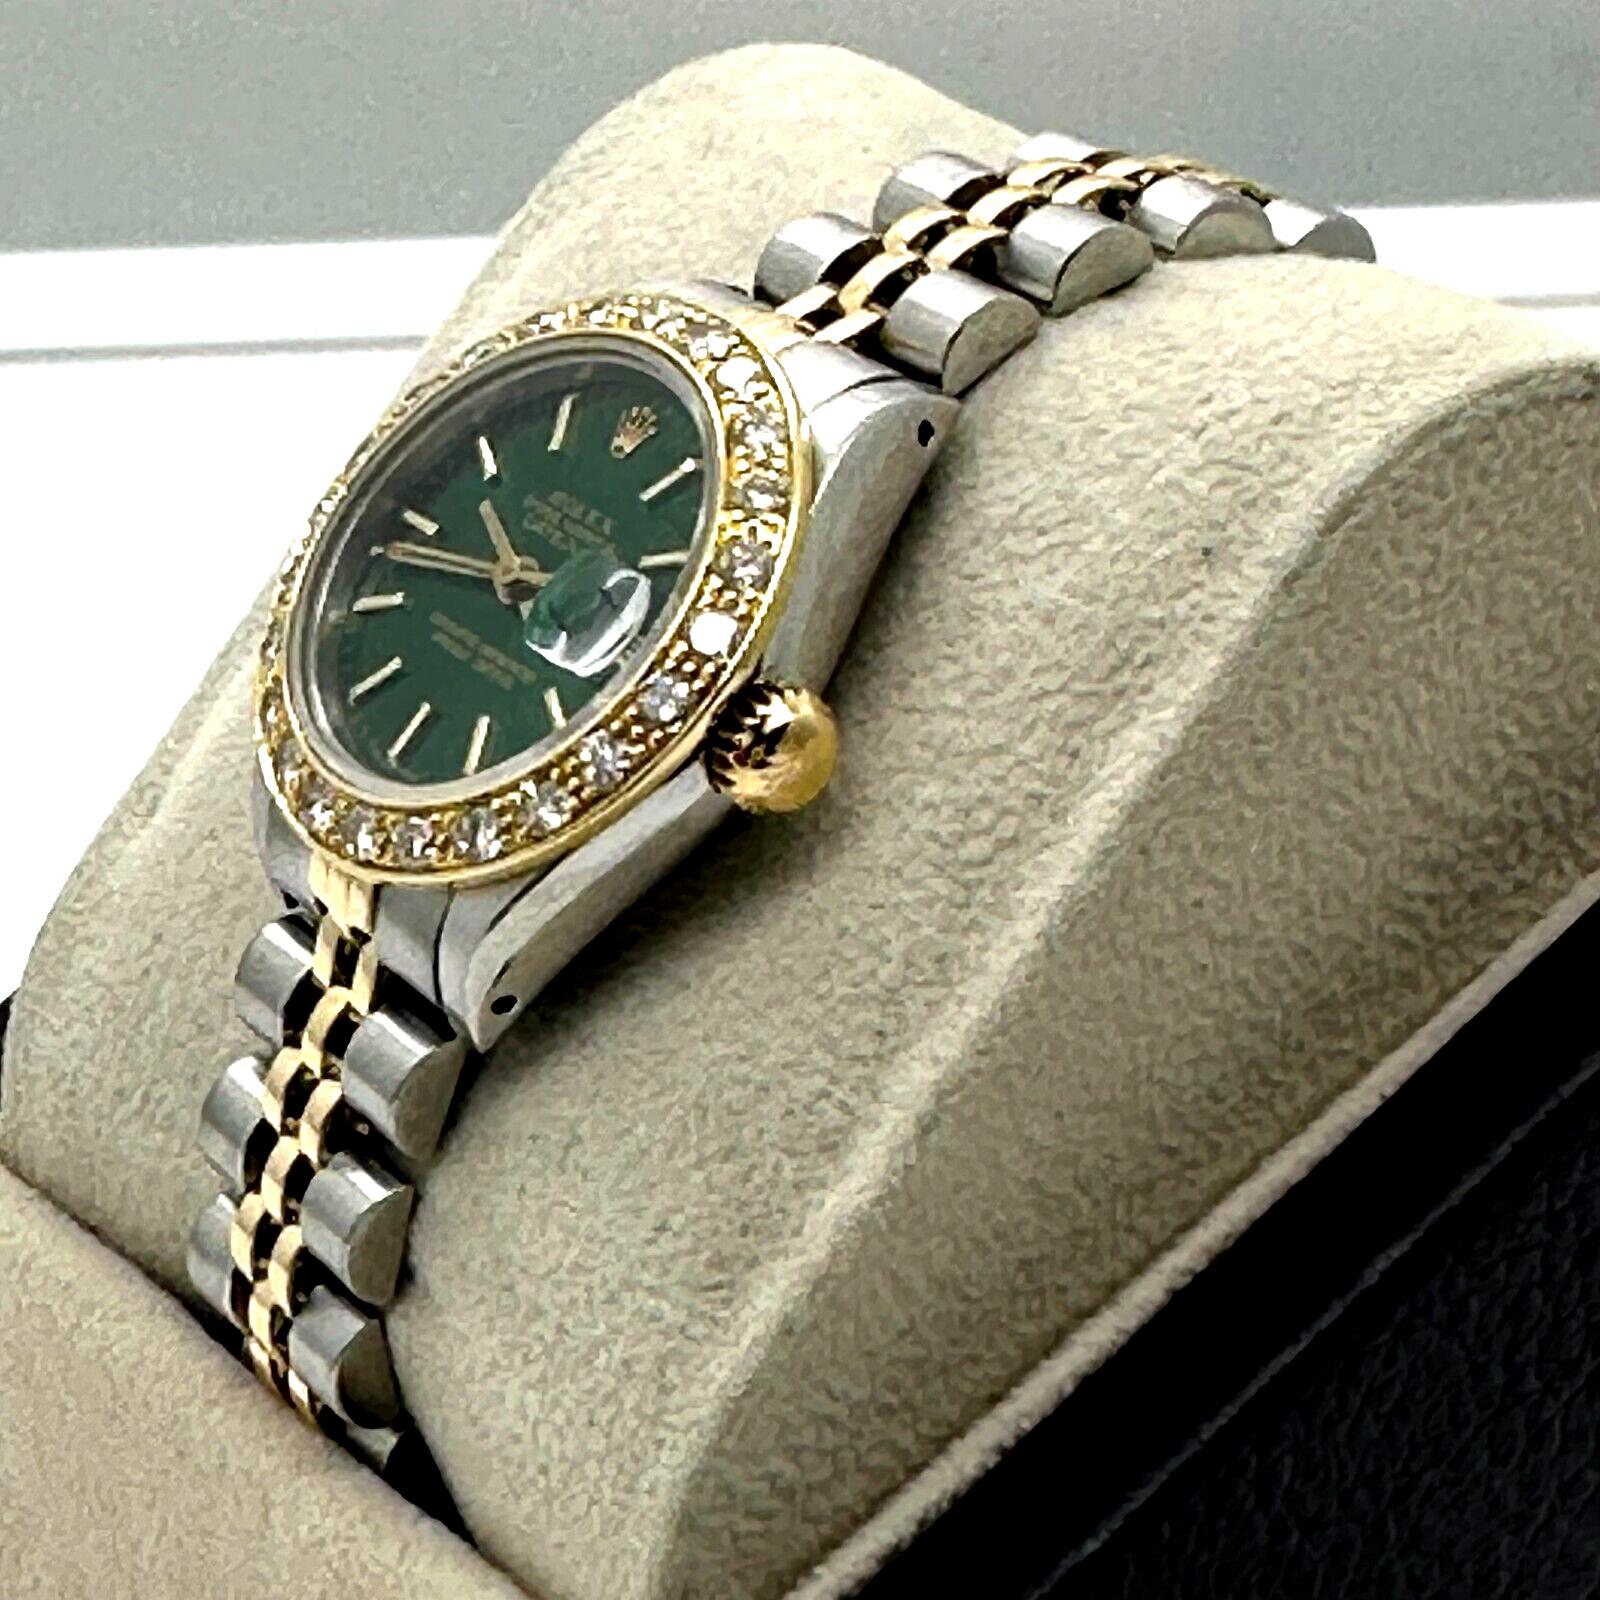 Style Number: 69173

Serial: 8615***

Year: 1984

Model: Ladies Datejust

Case Material: Stainless Steel 

Band: 18K Yellow Gold & Stainless Steel 

Bezel: Custom Diamond Bezel

Dial: Custom Green Dial

Face: Sapphire Crystal

Case Size: